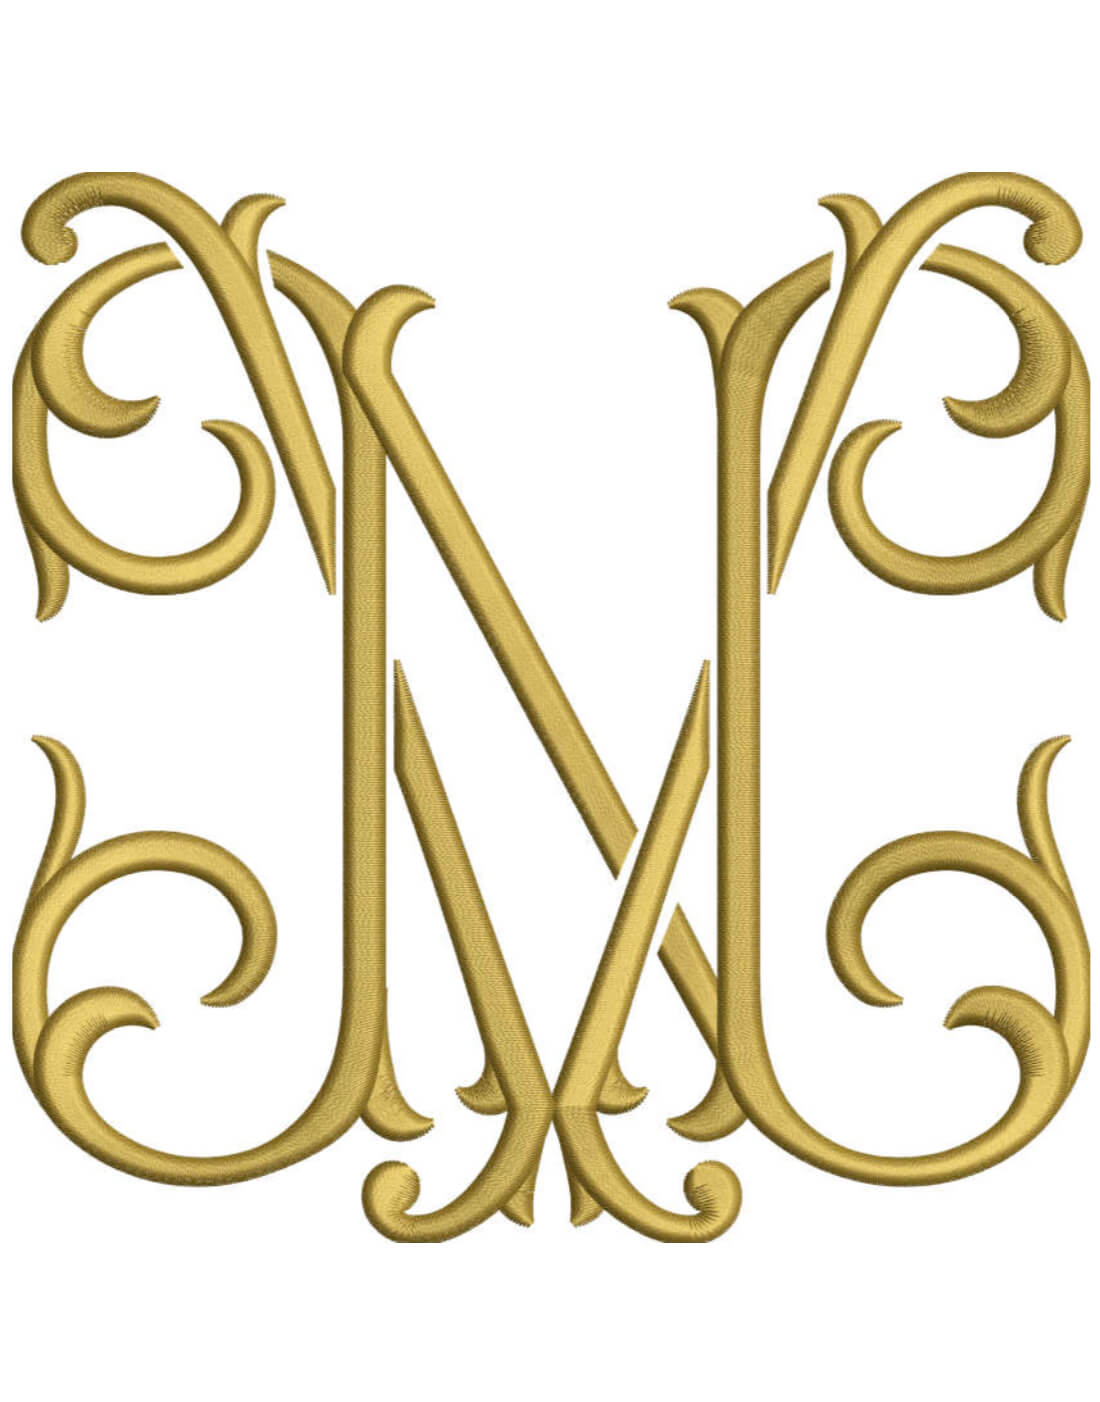 Monogram Couture NV for Embroidery